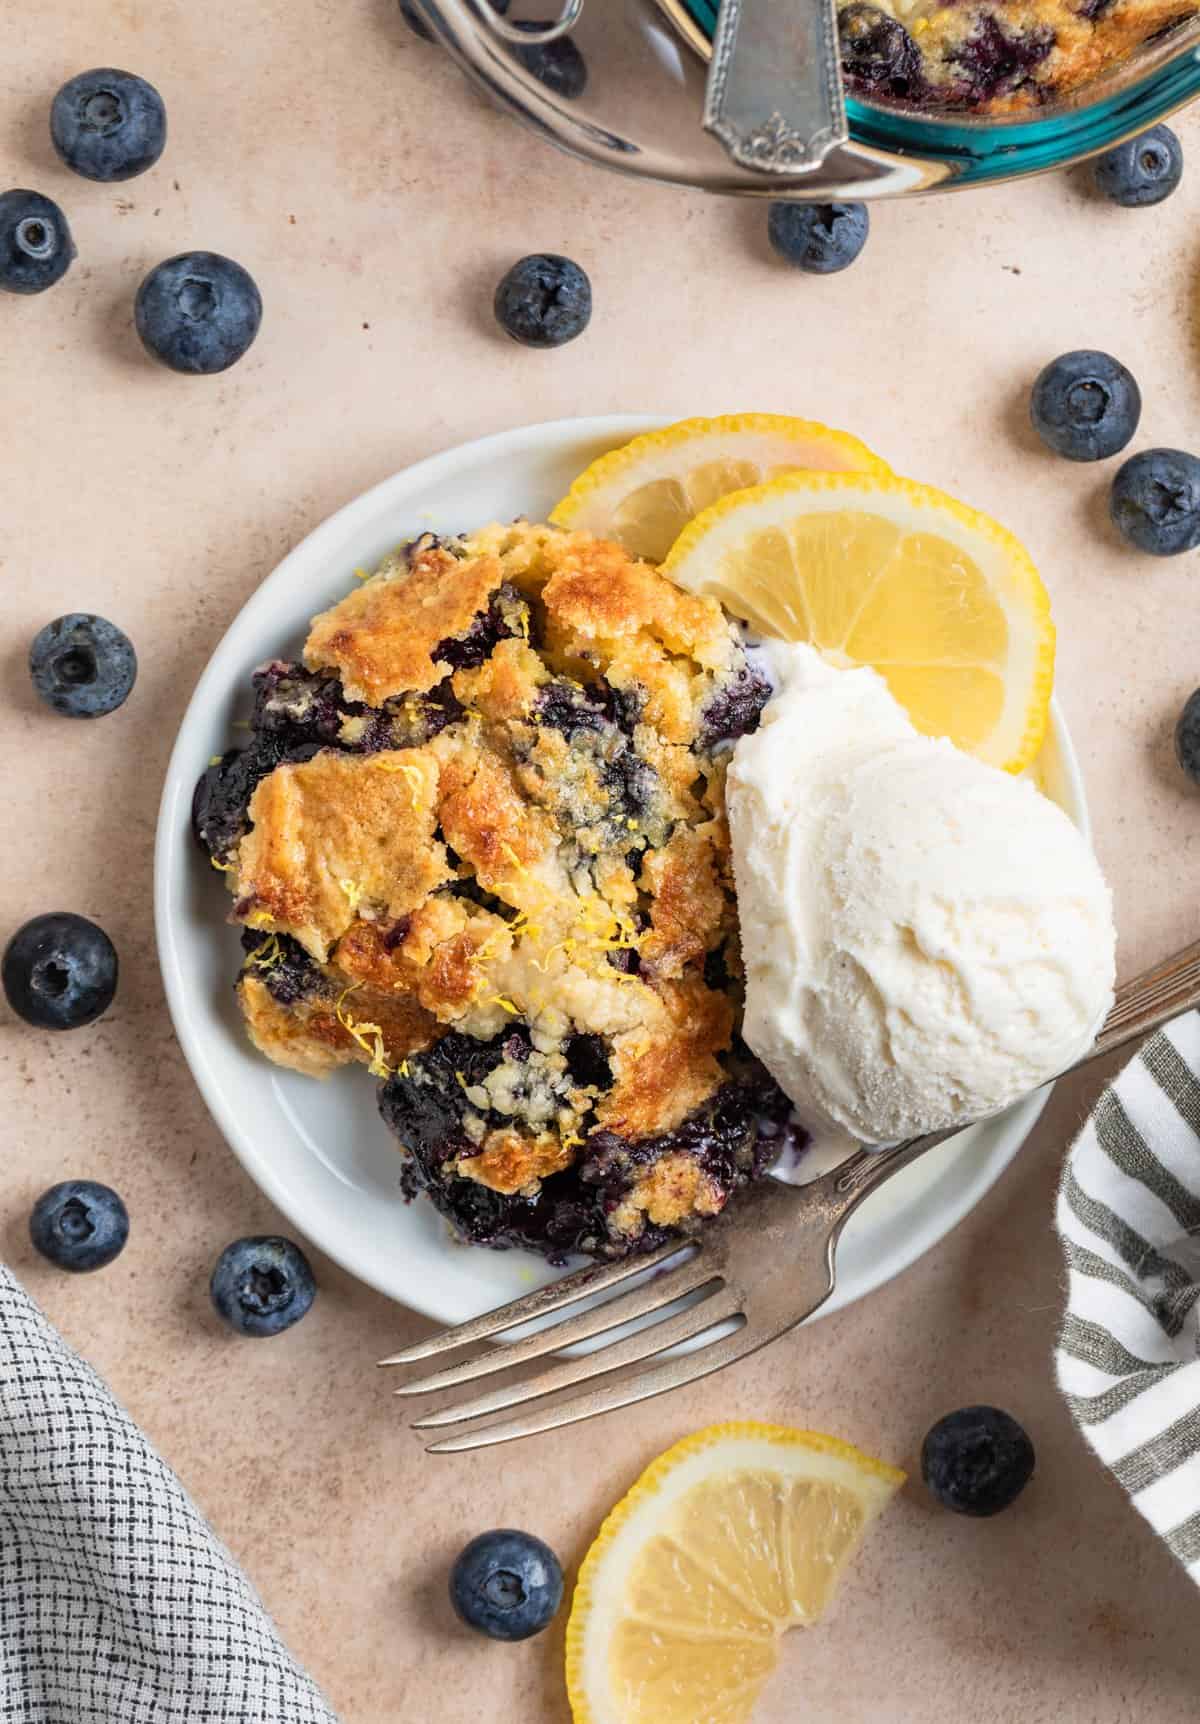 Overhead view of piece of blueberry cobbler on white plate with ice cream and fresh blueberries surrounding.